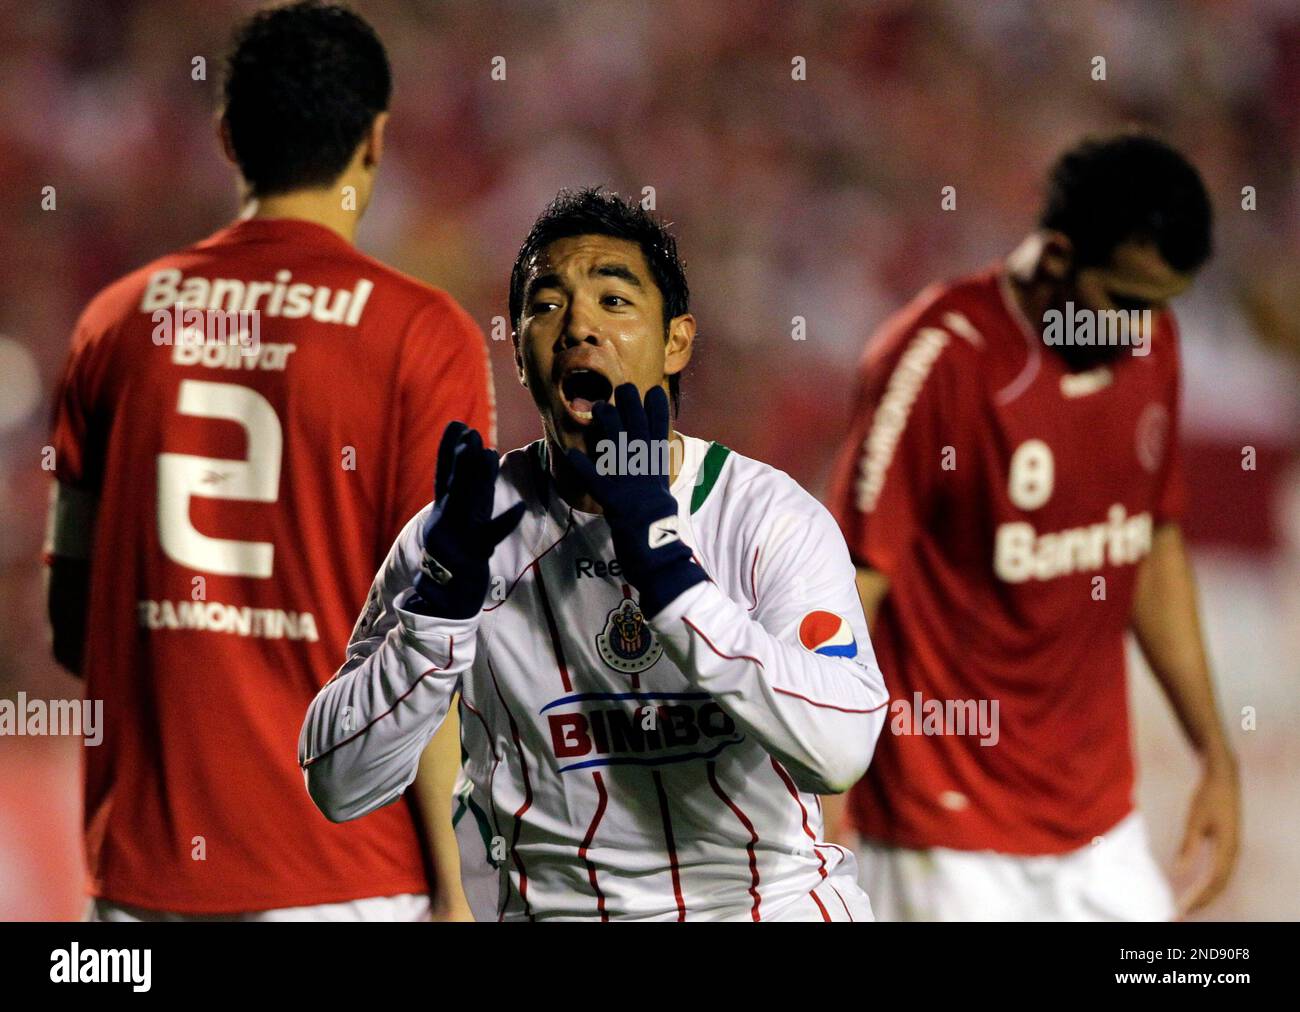 Mexico Chivas' Marco Fabian, front, celebrates after scoring during the Copa Libertadores final soccer match against Brazil's SC Internacional in Porto Alegre, Brazil, Wednesday, Aug. 18, 2010. At left, Brazil's SC Internacional's Bolivar. (AP Photo/Silvia Izquierdo) Stock Photo